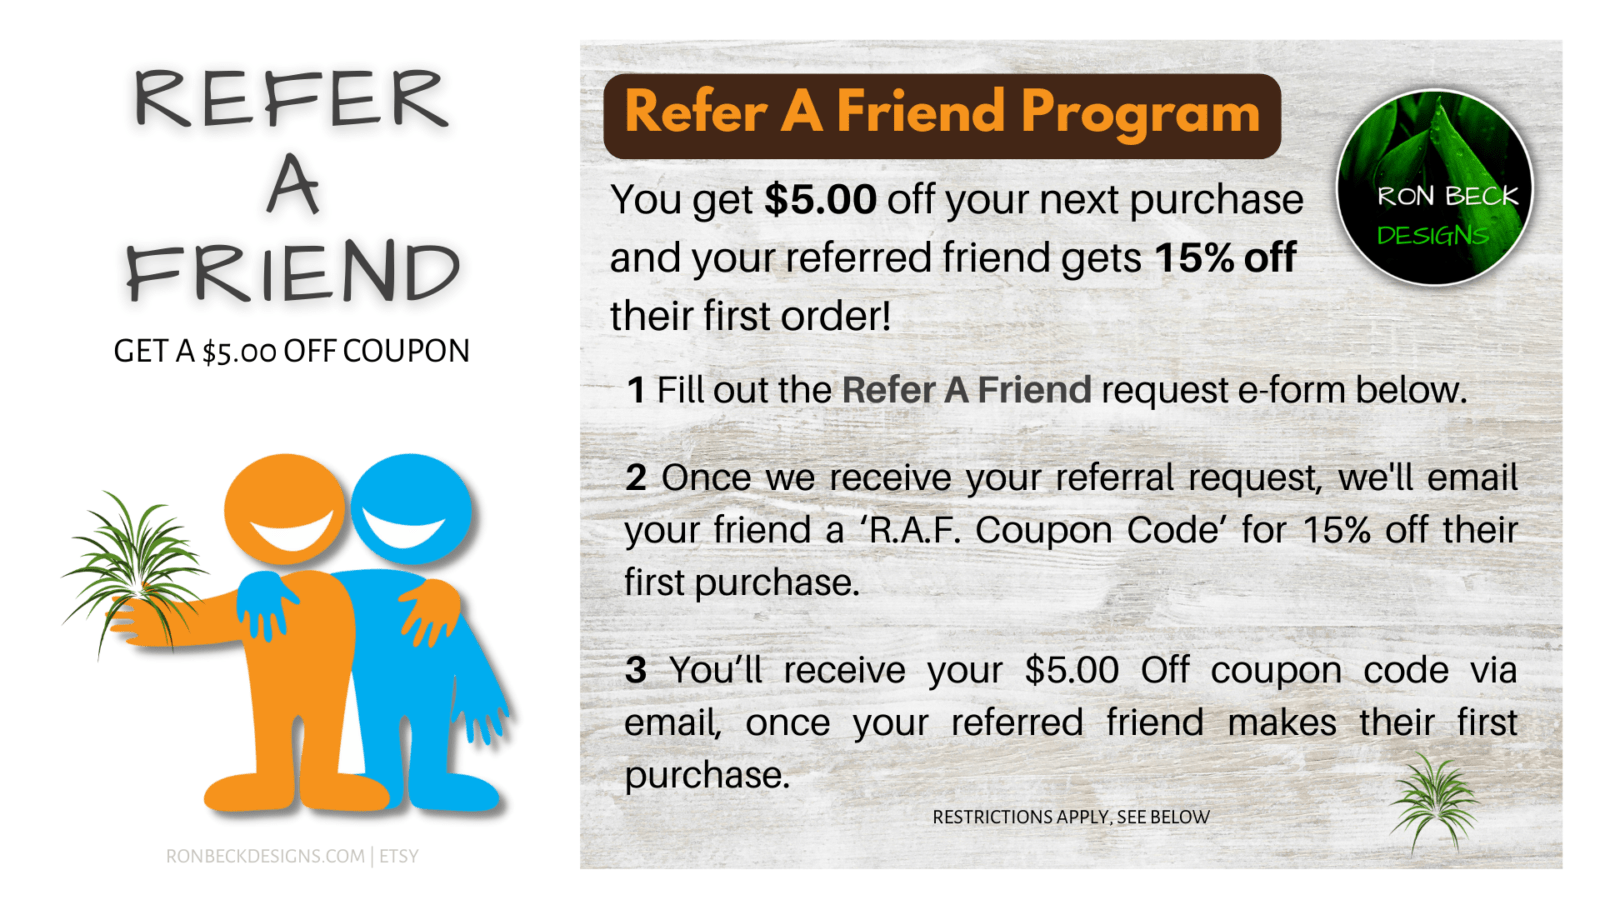 Refer A Friend - Ron Beck Designs without1920 1080